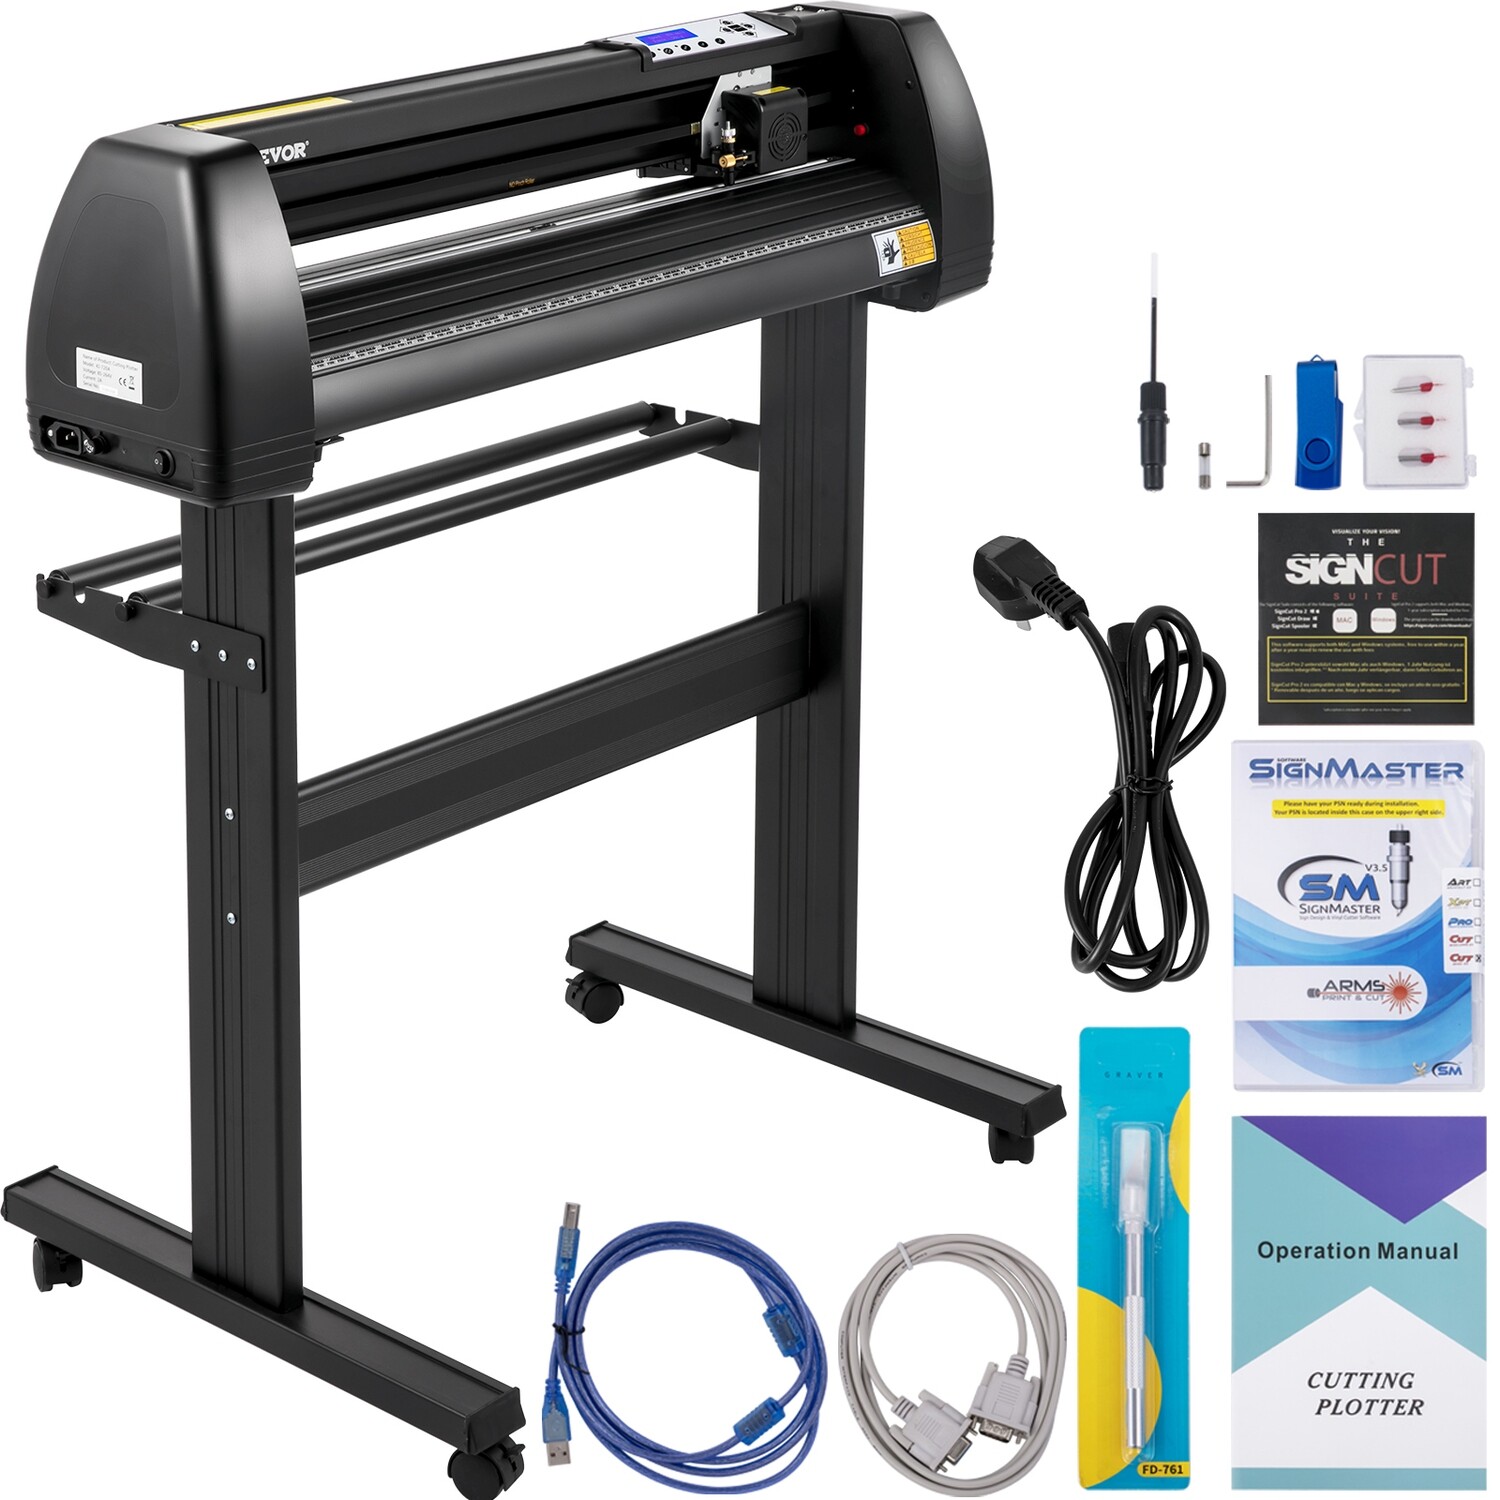 28-inch vinyl cutter machine, Lcd Display With Vinyl Plotter and Signcut Software